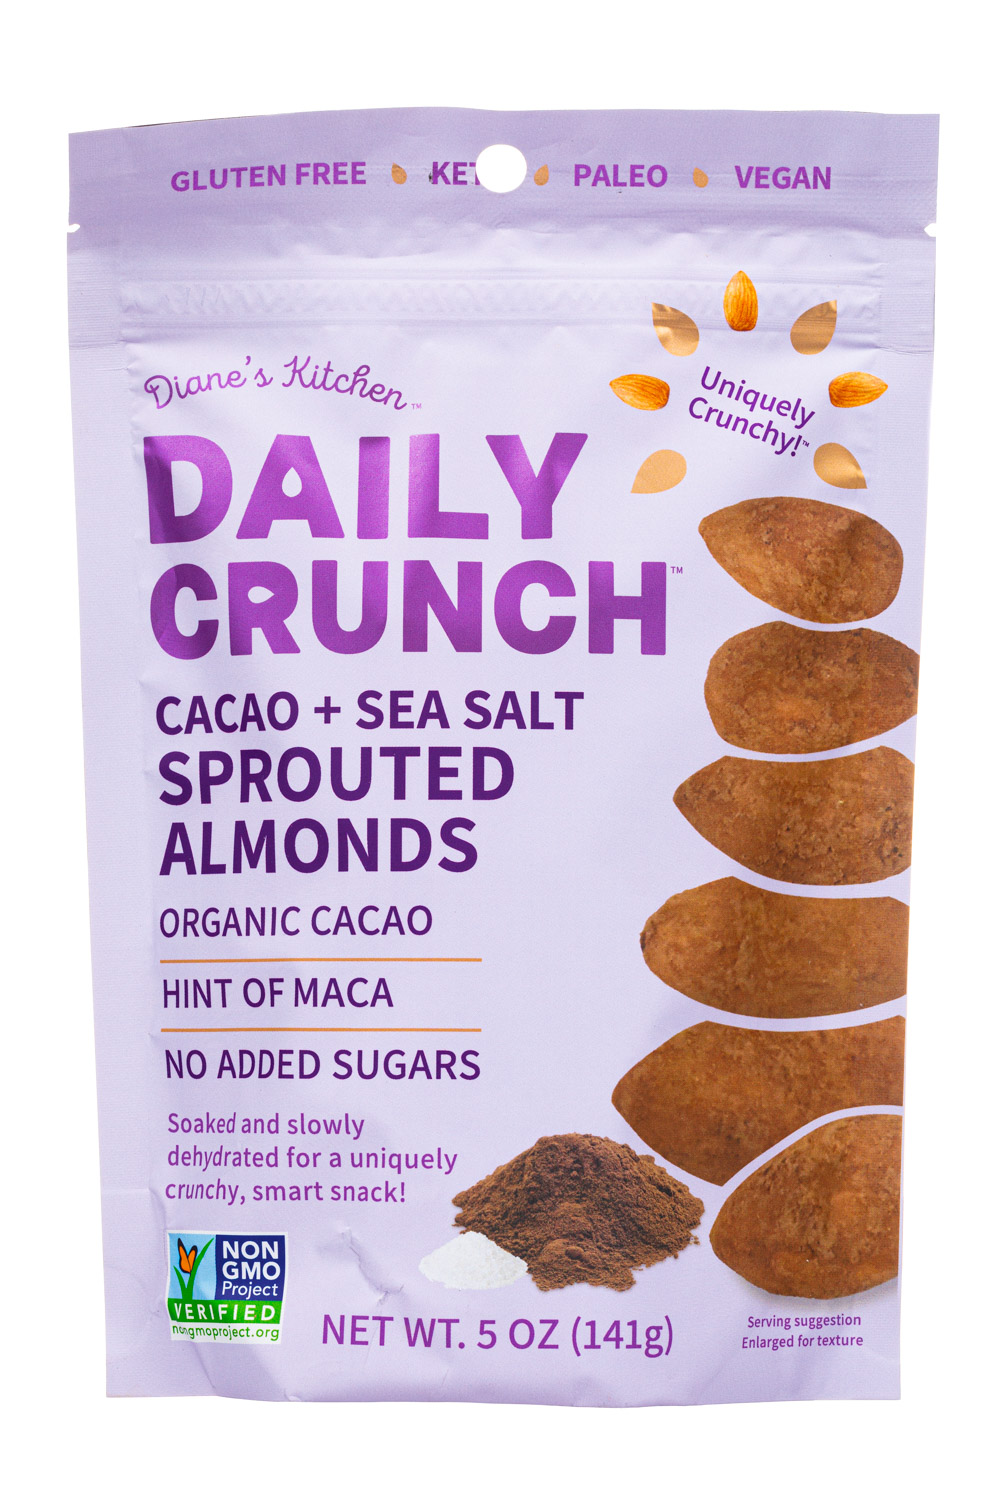 Cacao + Sea Salt: Sprouted Almonds